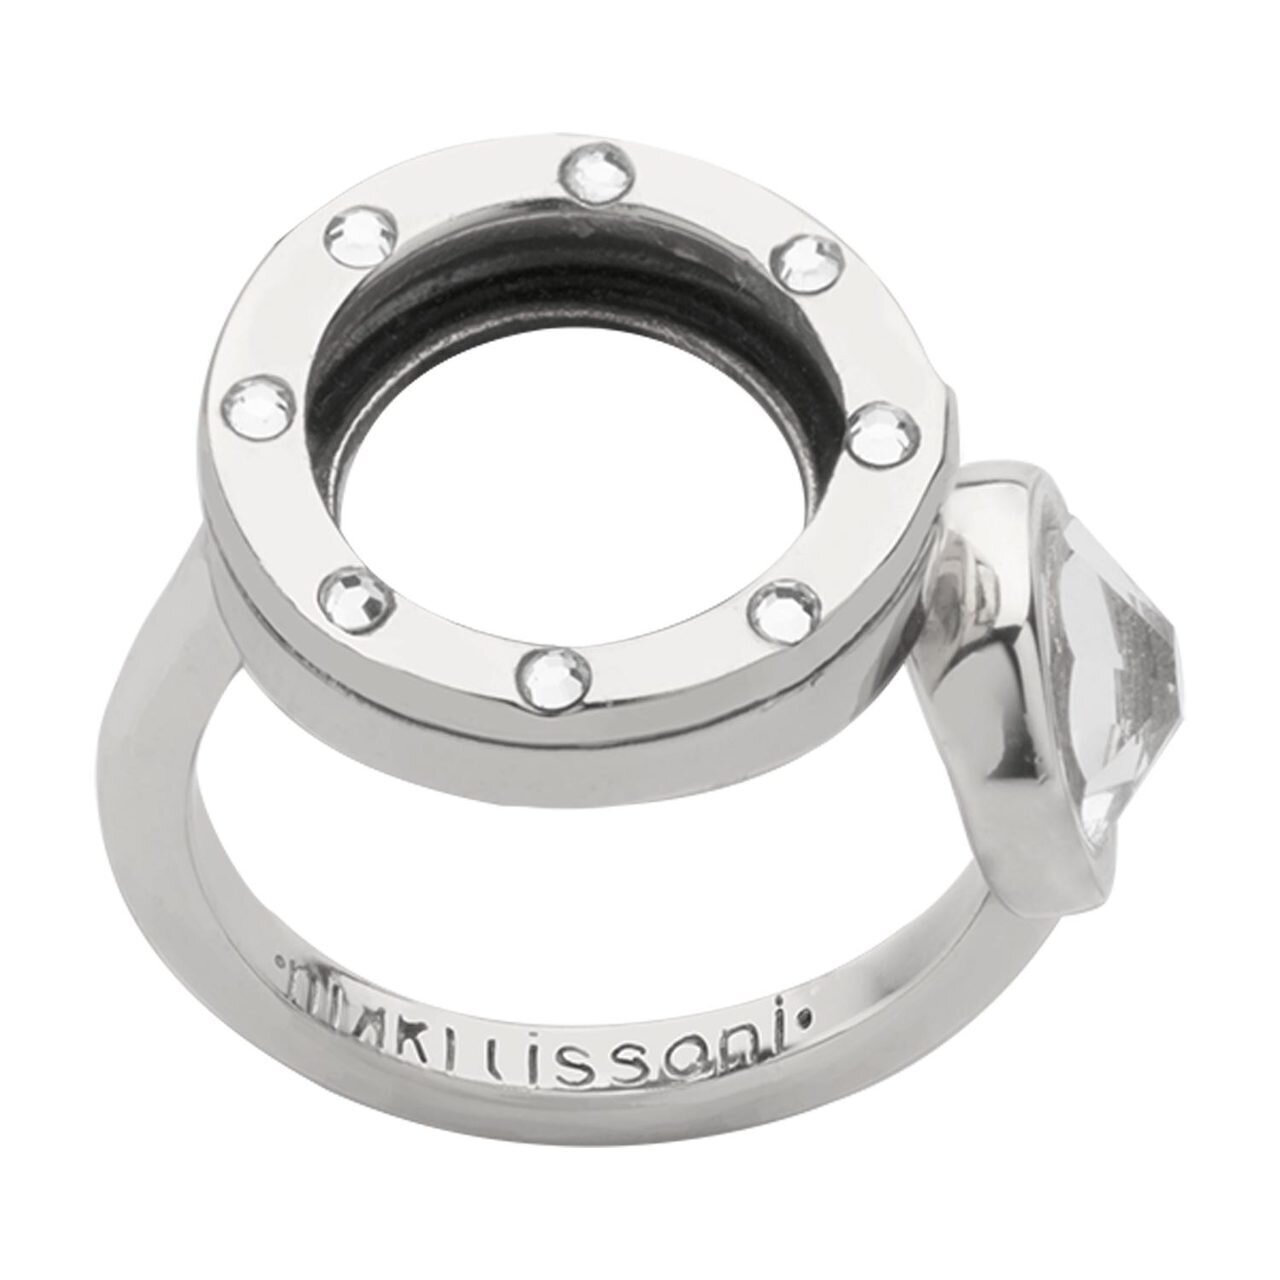 Nikki Lissoni Interchangeable Open Ring with Swarovski Stones Silver-plated Size 9 R1006S9